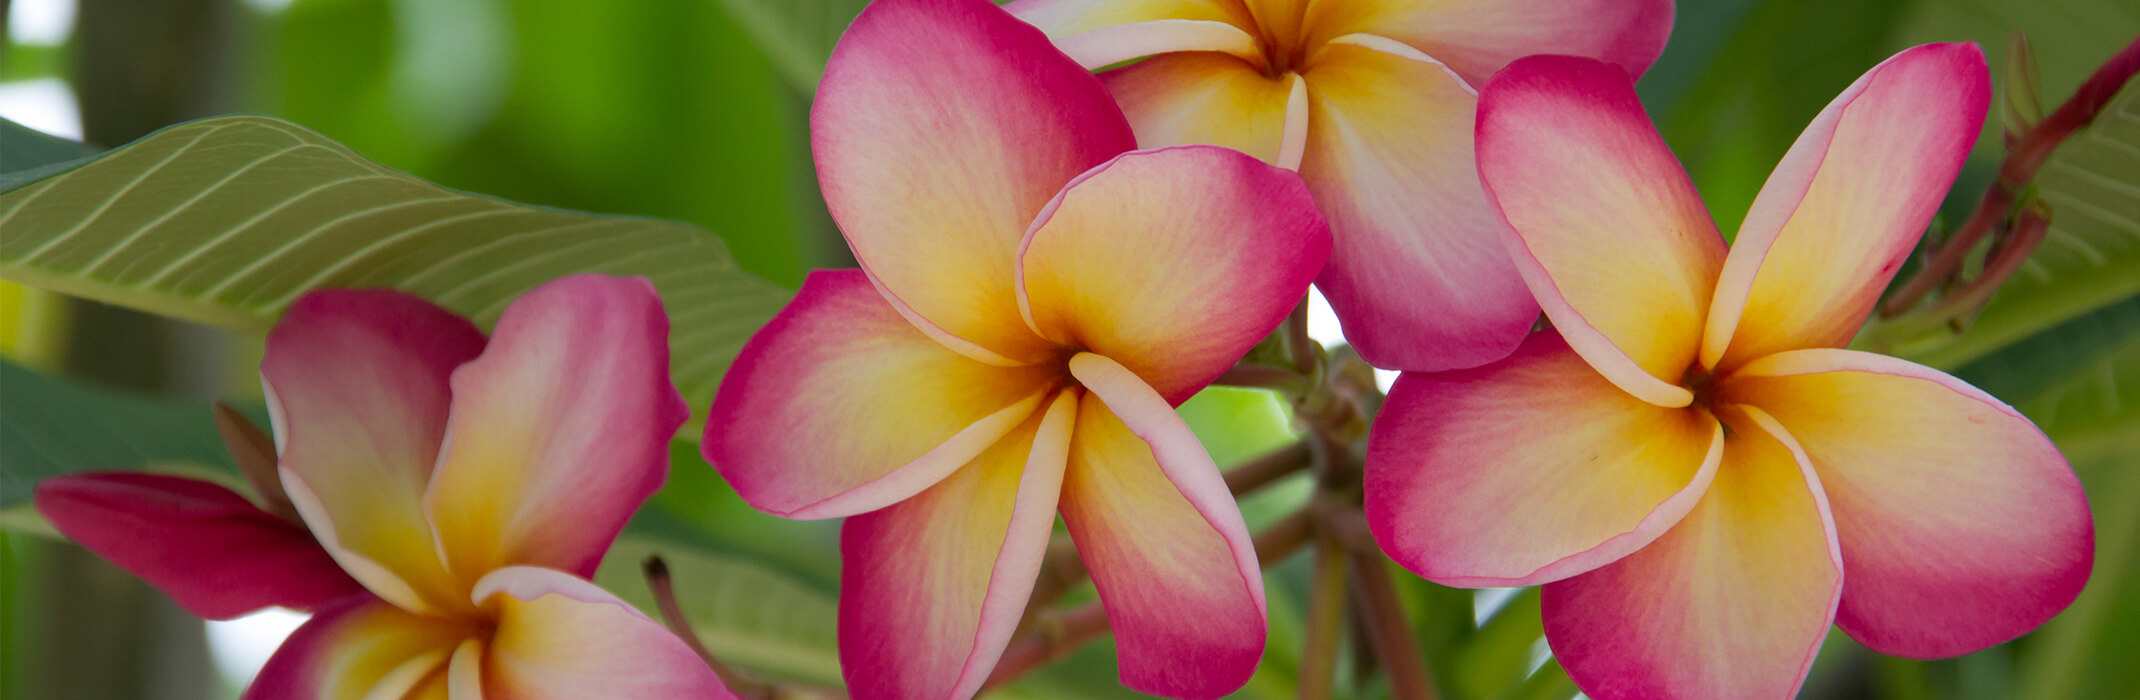 Closeup of pink yellow and white plumeria flowers with leaves and blurred green background